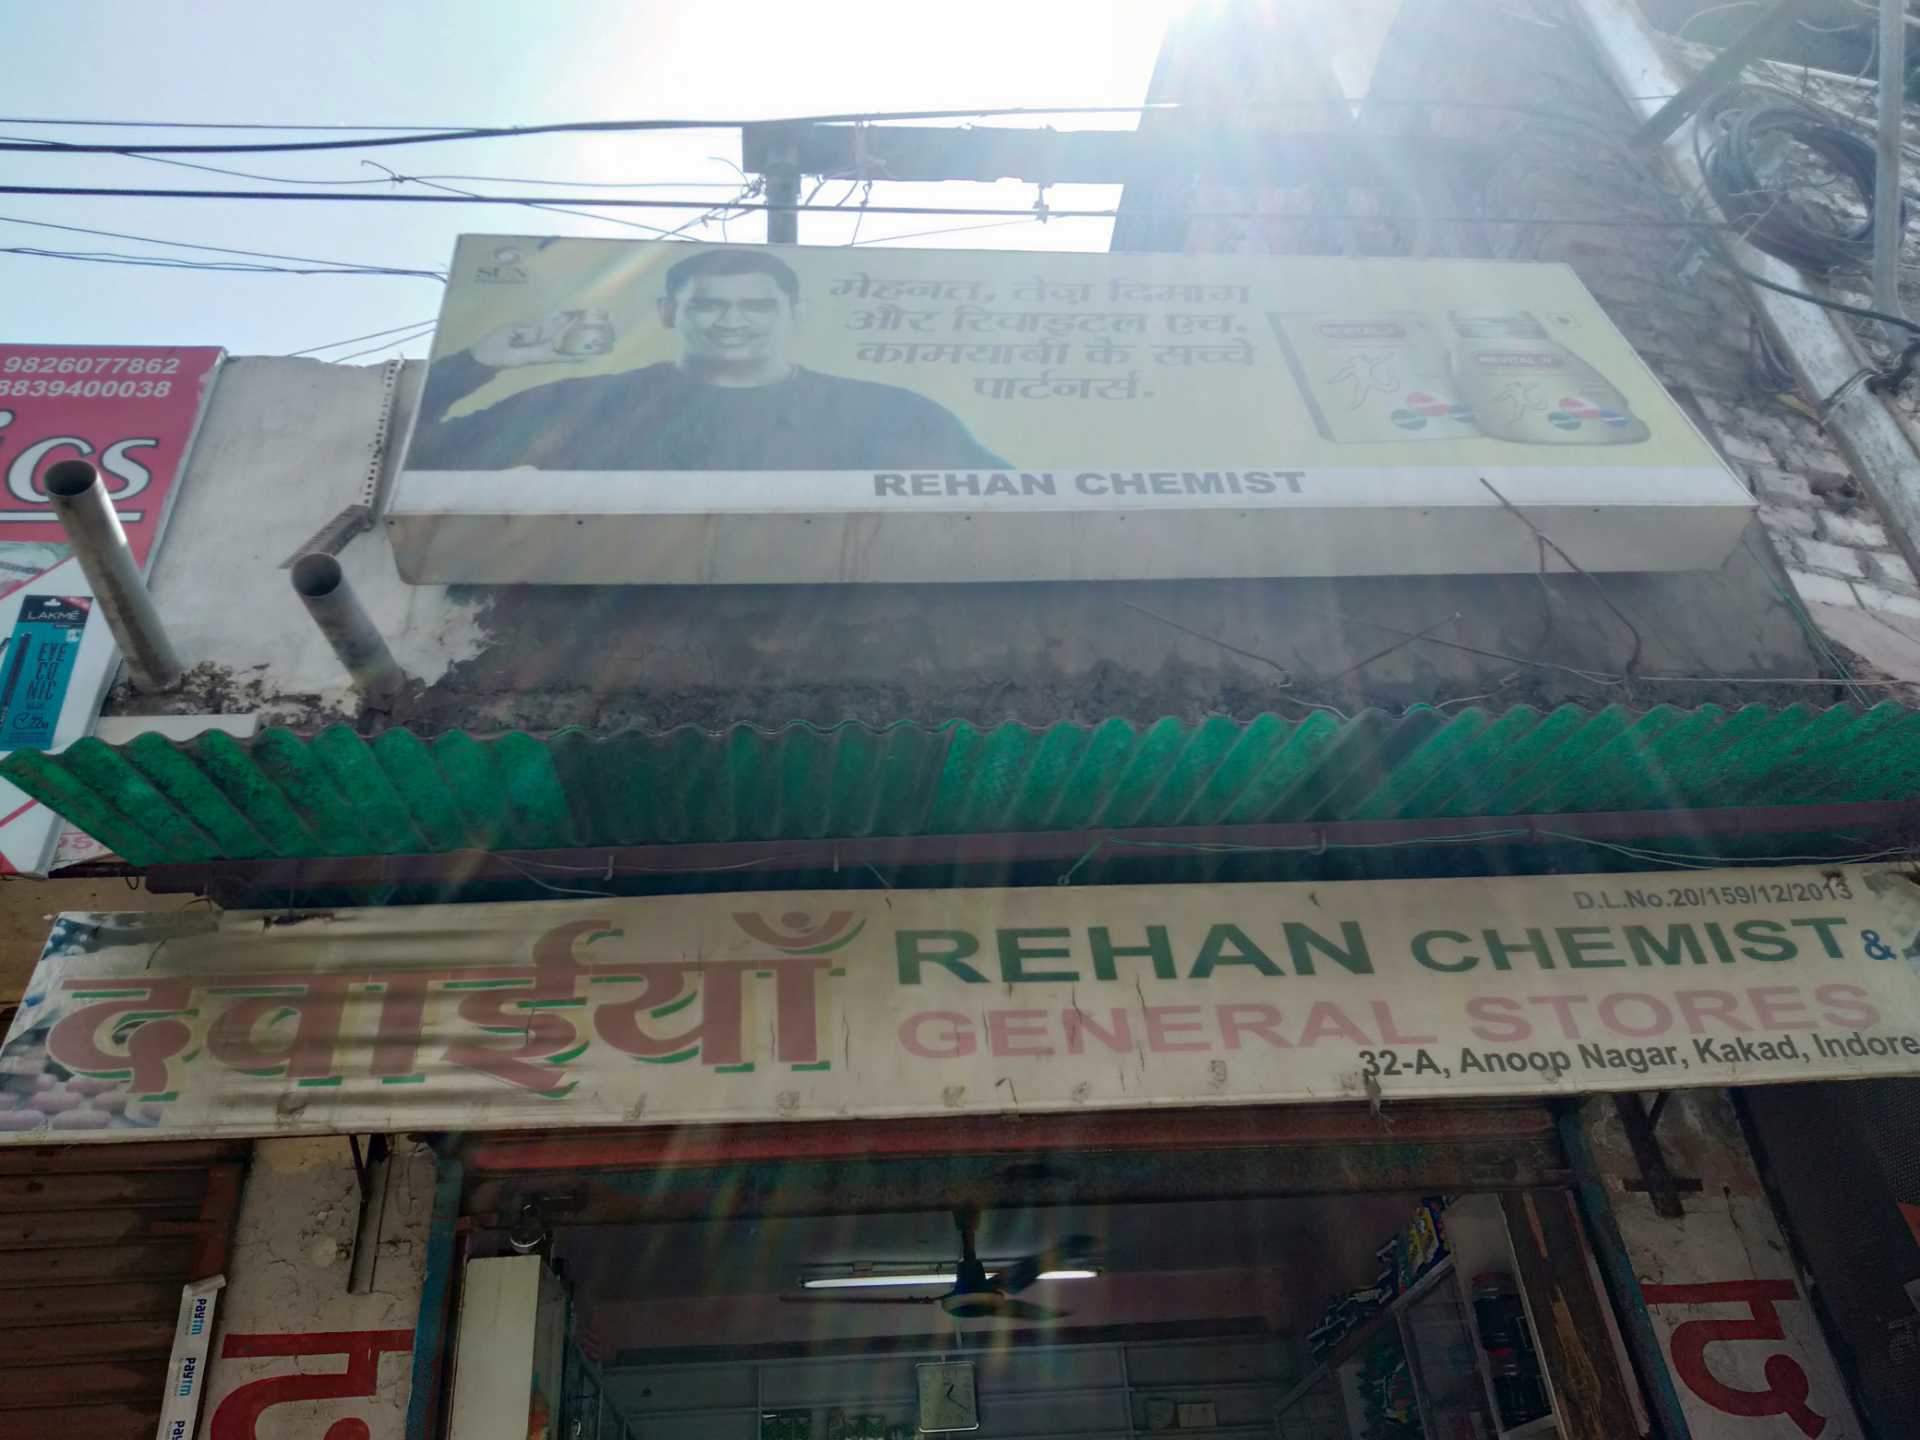 Rehan Chemist Photos, Anoop Nagar, Indore- Pictures - Commercial Building , HD Wallpaper & Backgrounds